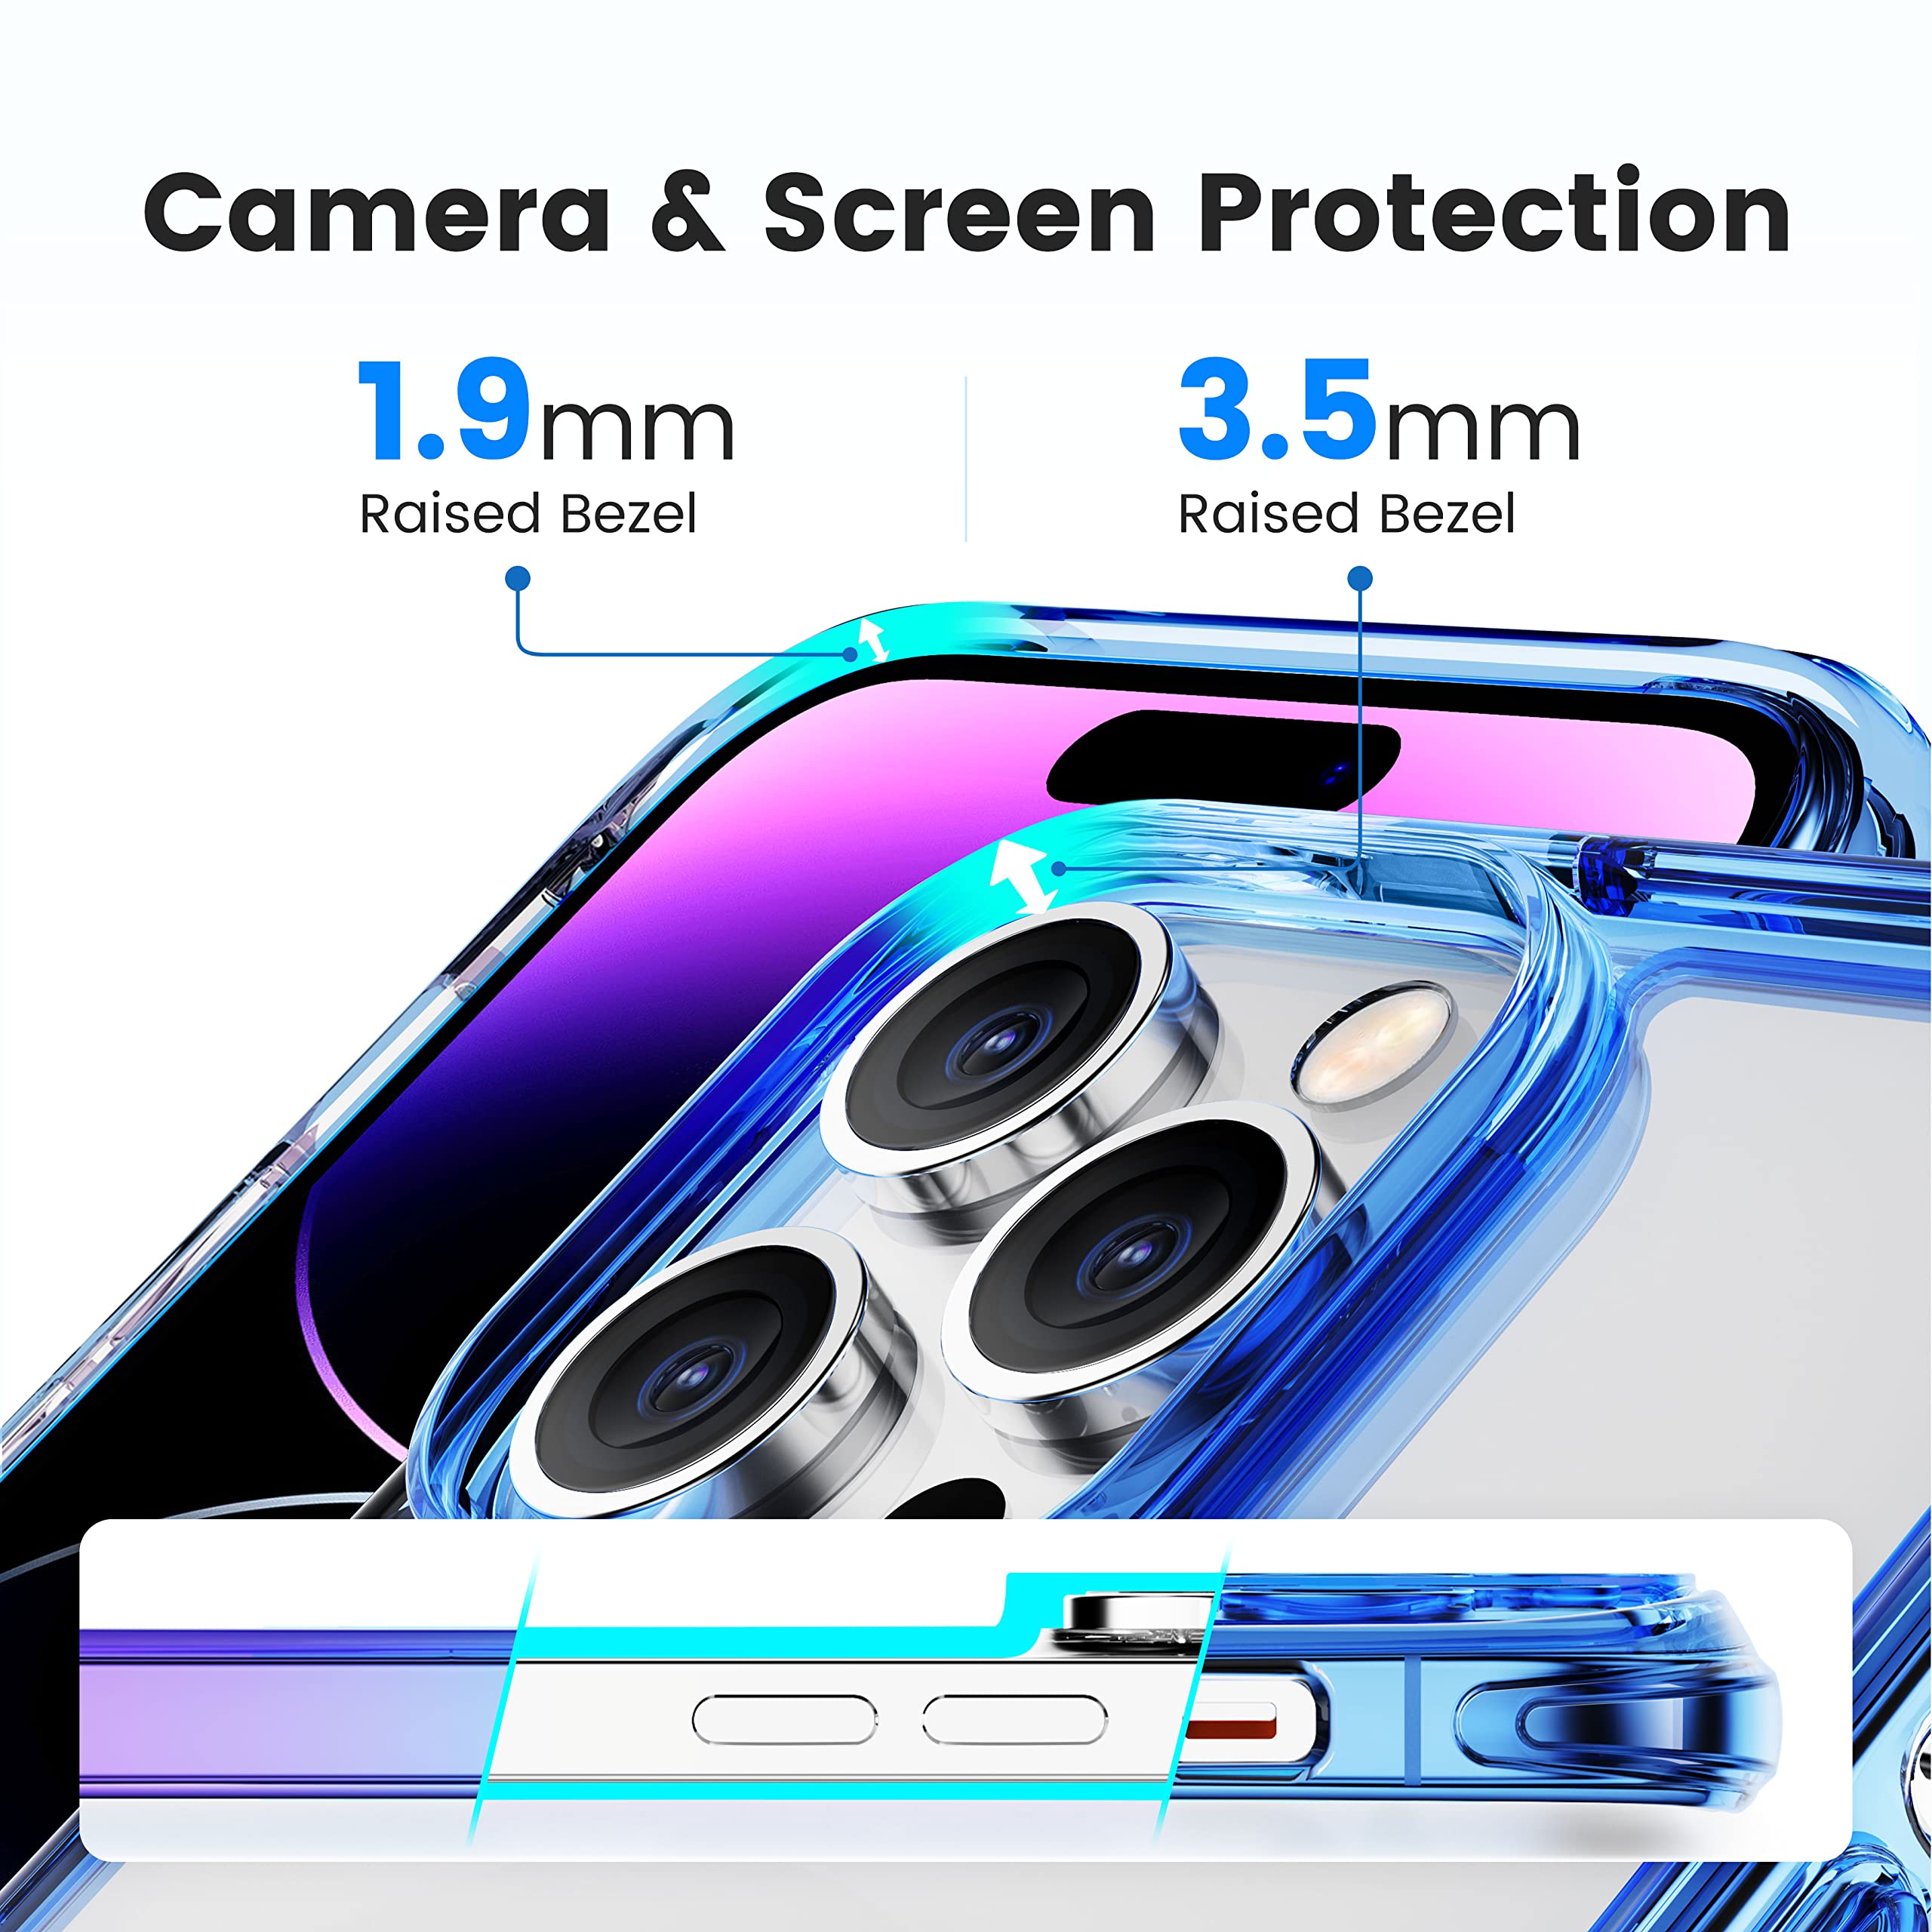 Mkeke Strong Magnetic for iPhone 14 Pro Max Case Compatible with MagSafe Gradient Purple Blue Case Non Yellowing Shockproof Case for iPhone 14 Pro Max 6.7 inch 2022